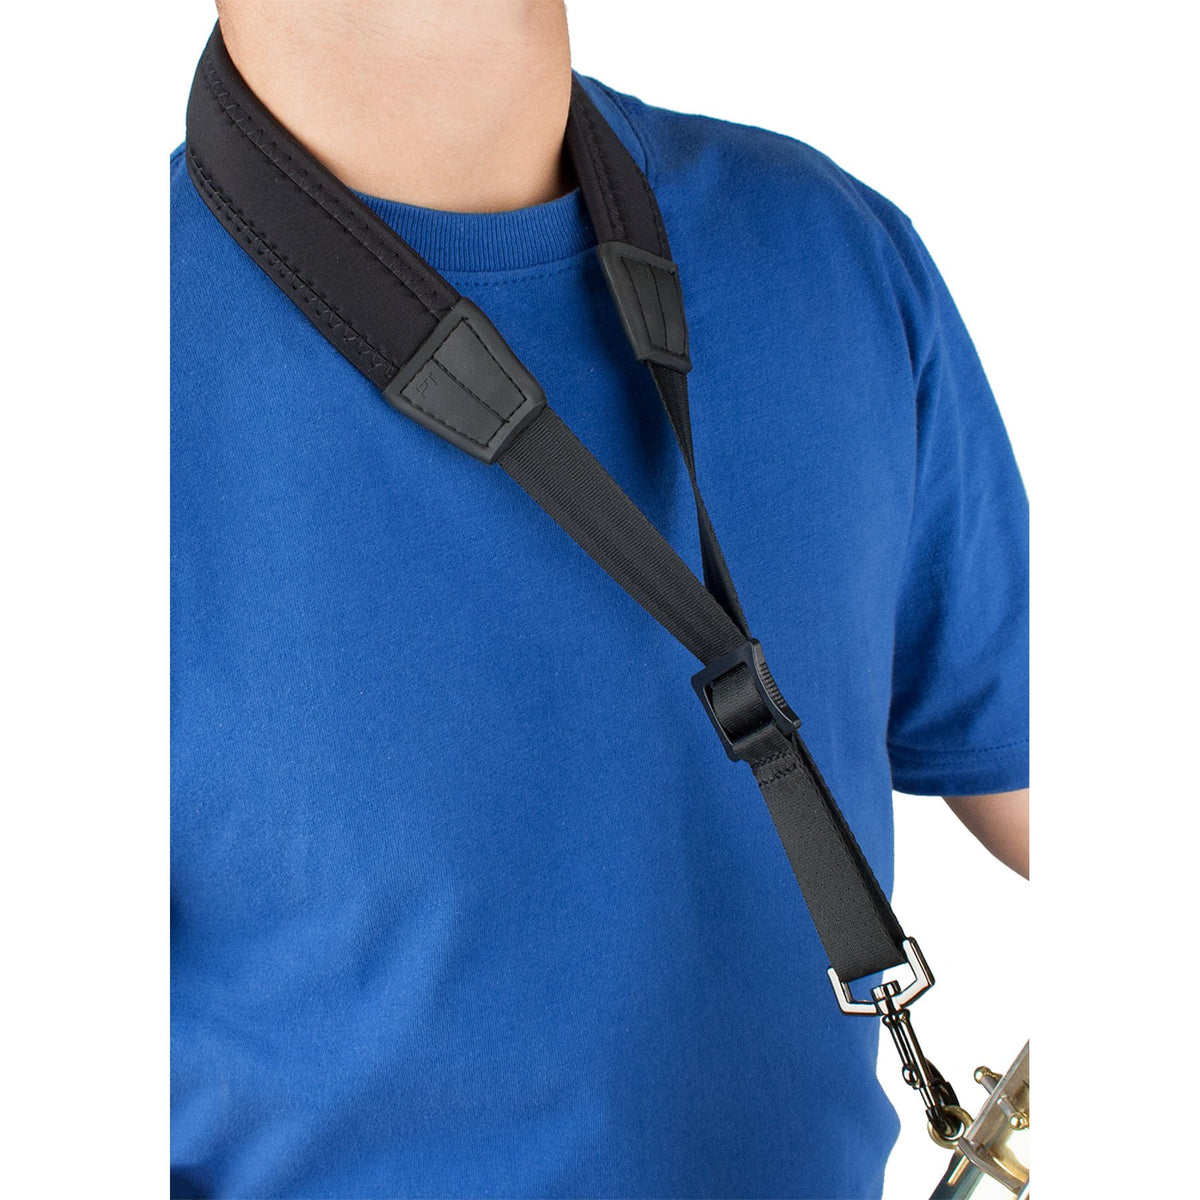 Protec - Padded Neoprene Saxophone Neck Strap with Plastic Swivel Snap-Accessories-Protec-Music Elements